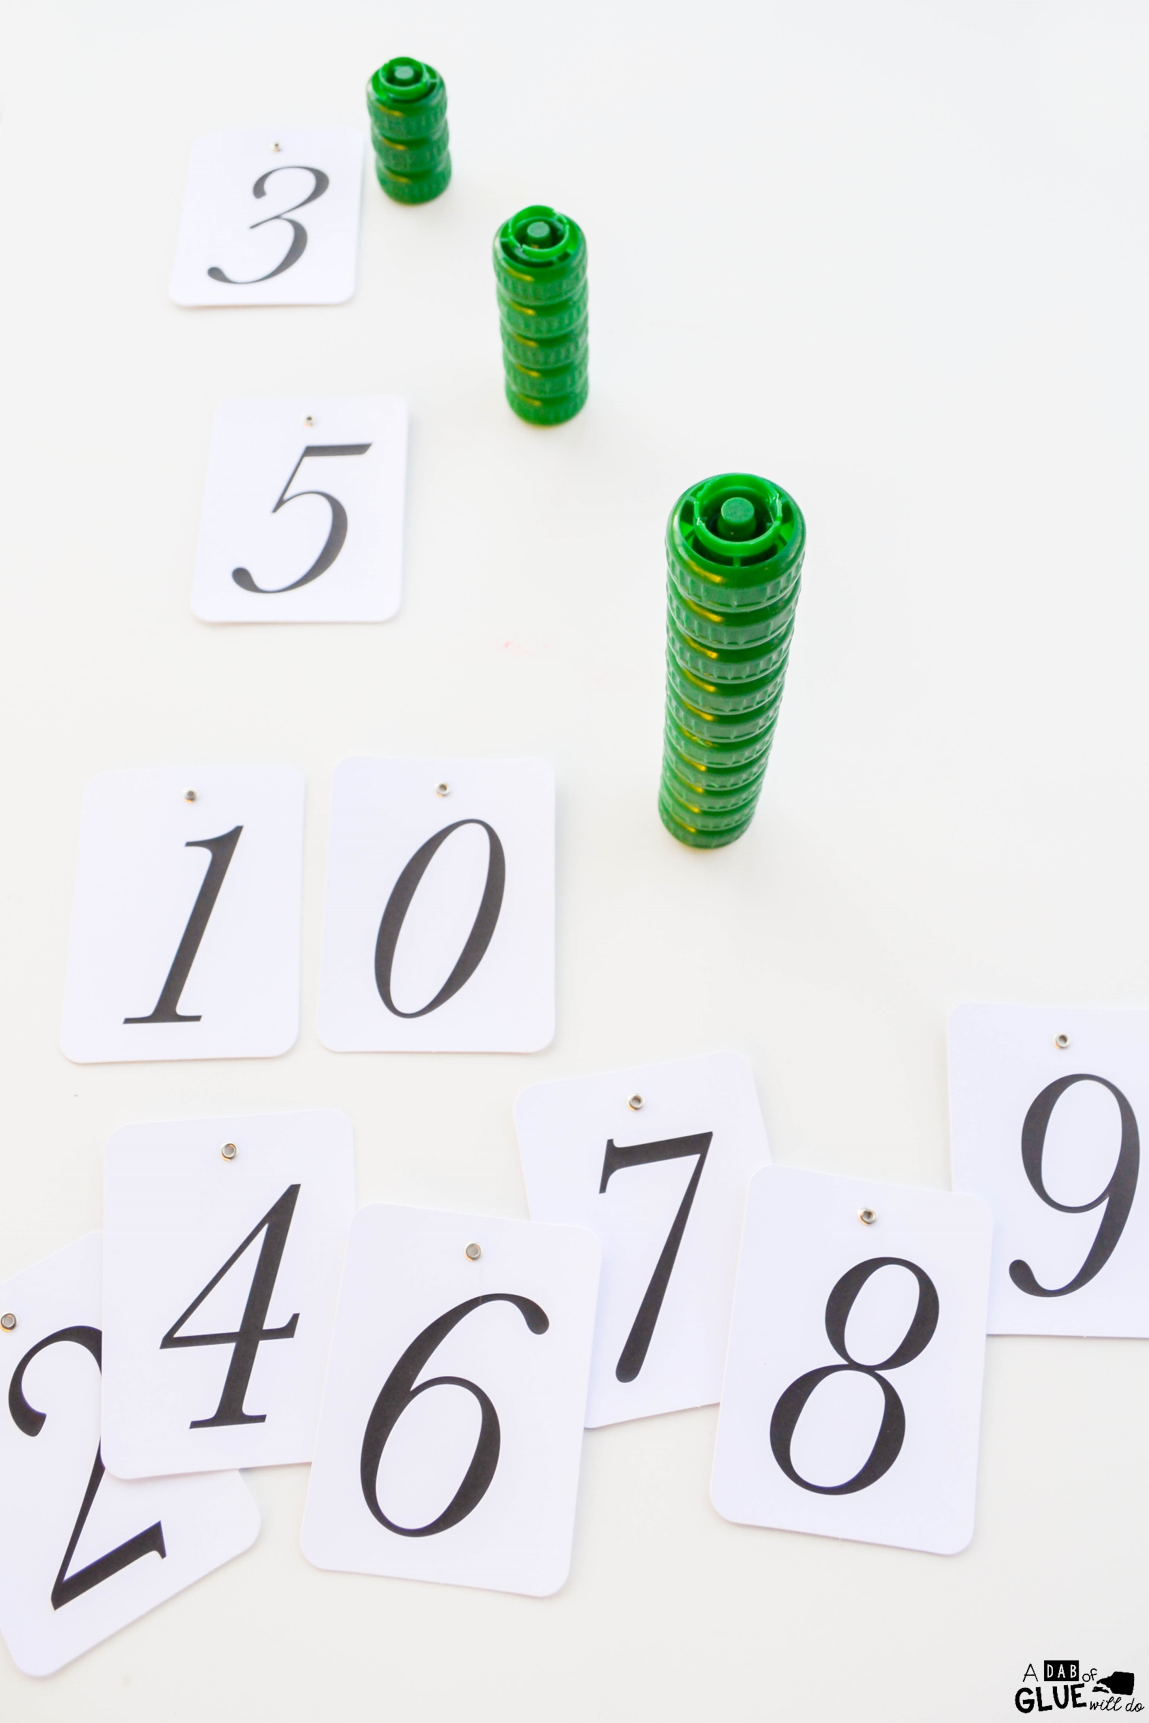 Challenge kids to a stacking challenge with leftover lids. Not only will they have fun trying to win, they can work on counting, numbers, and fine motor skills in the process. Stack a cap math activity is easy to put together, and can be adapted for preschool, kindergarten, or first grade.